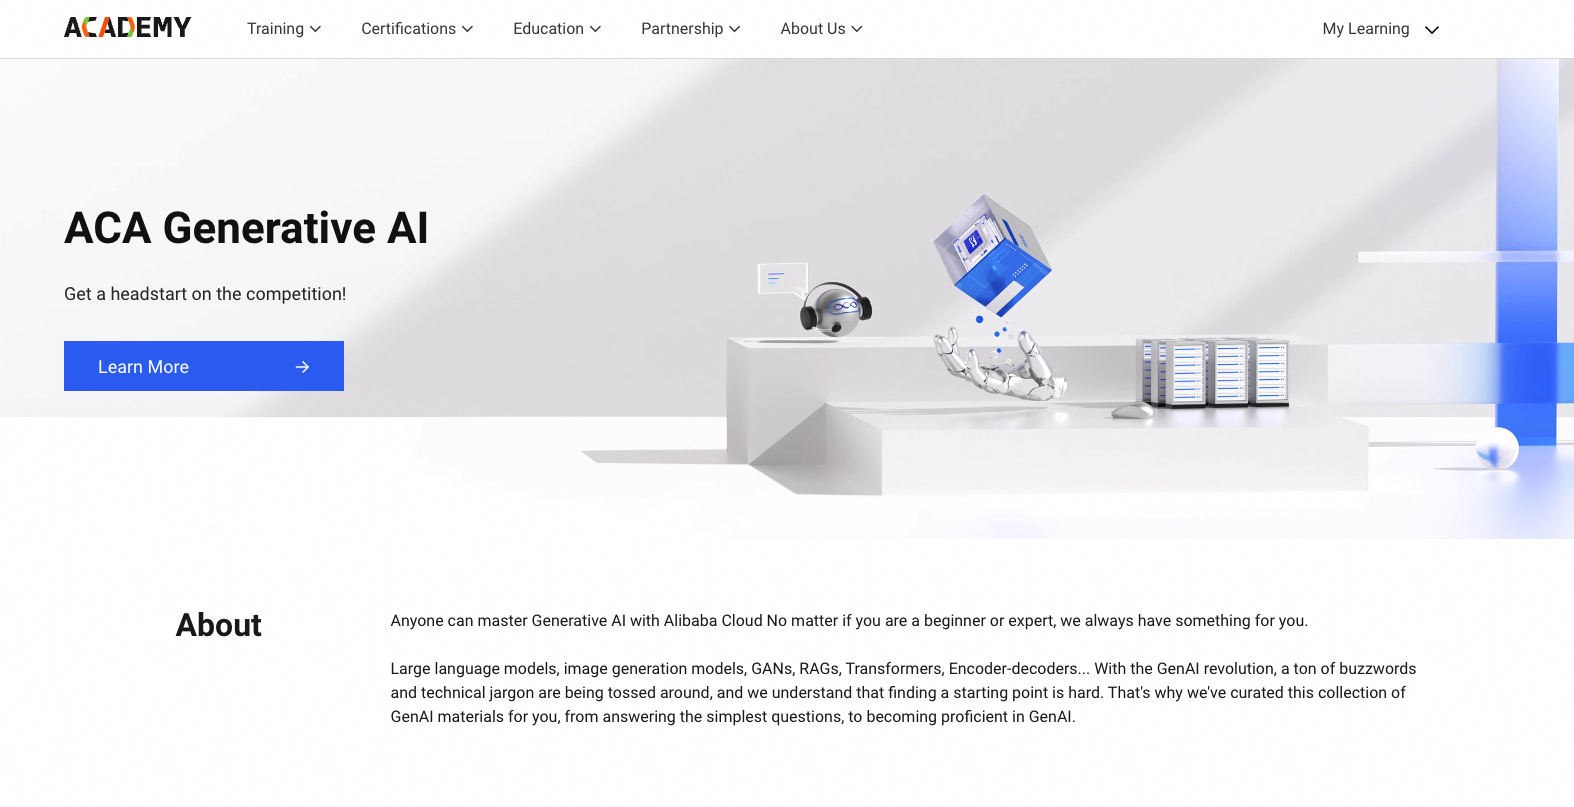 Alibaba Cloud Launches Generative AI Course to Upskill Global Digital Talent